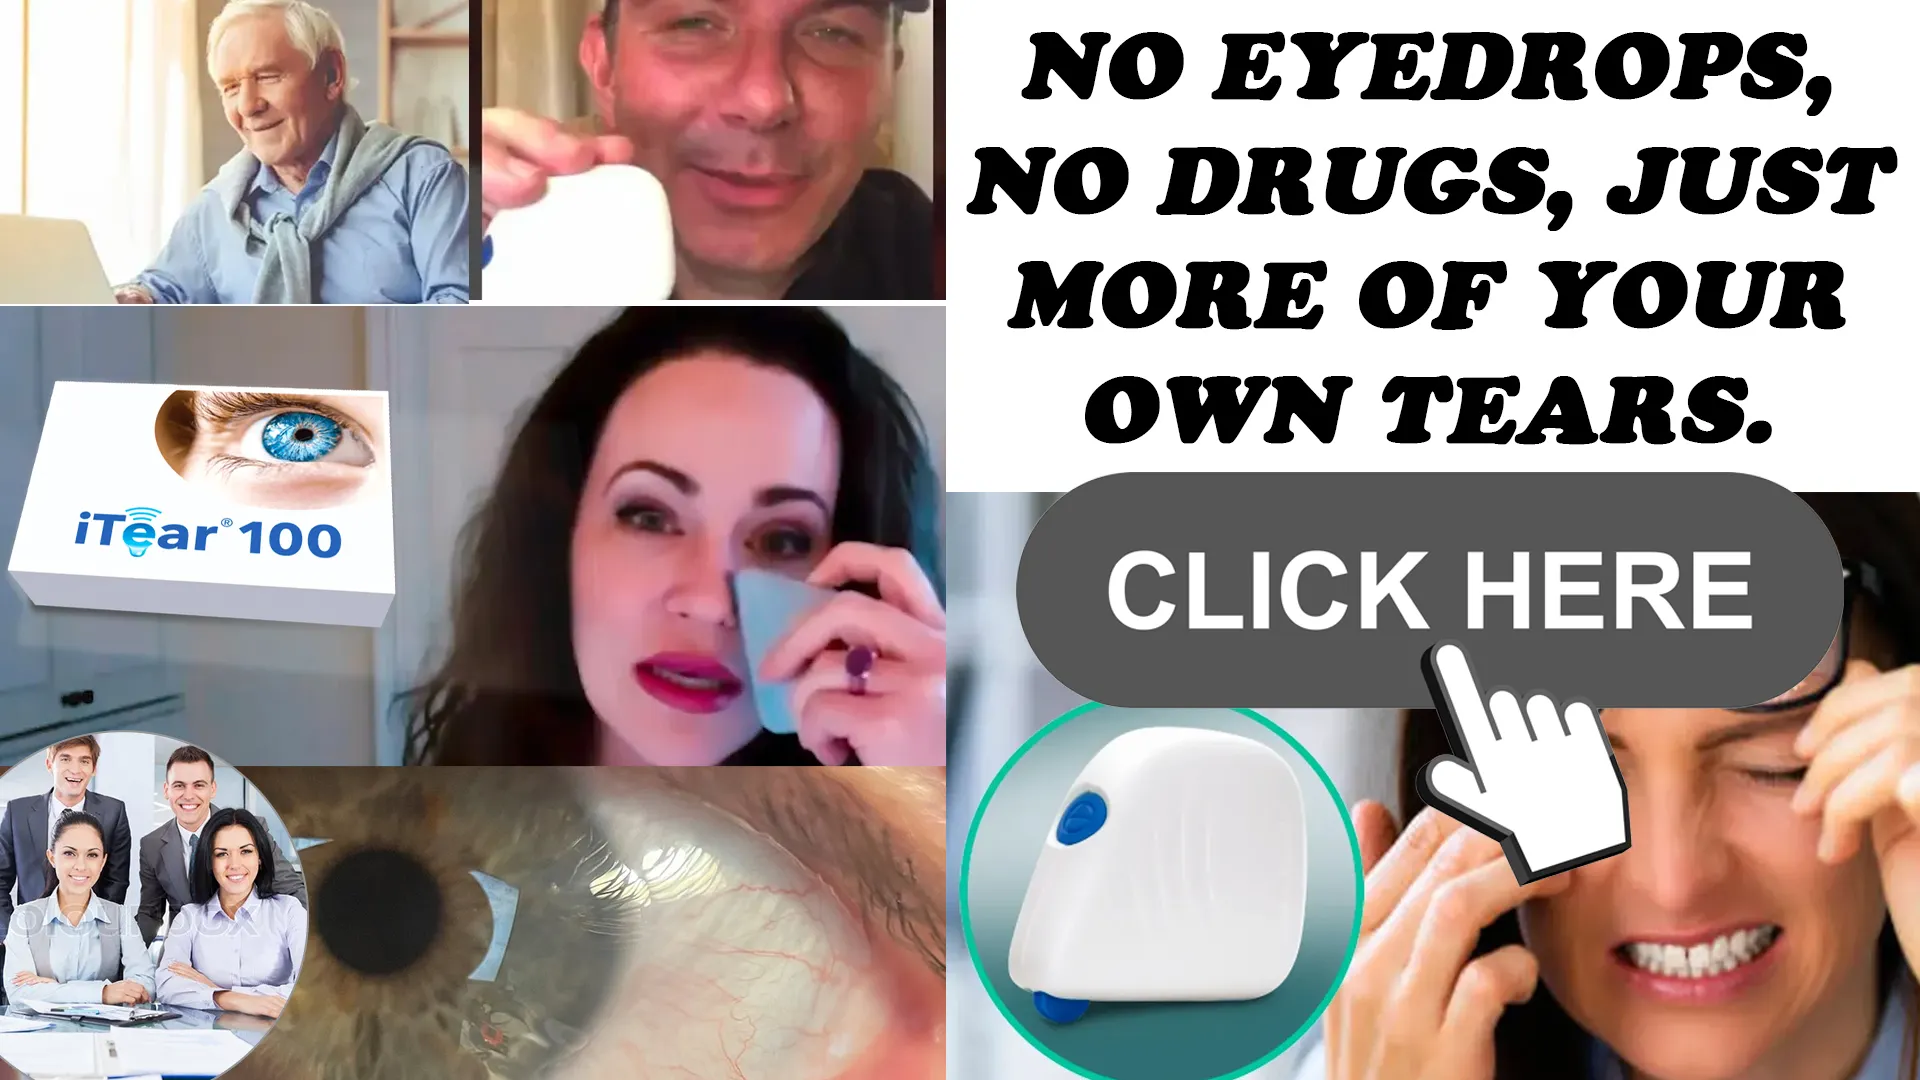 Tackling Dry Eye with iTEAR100 - How It Works